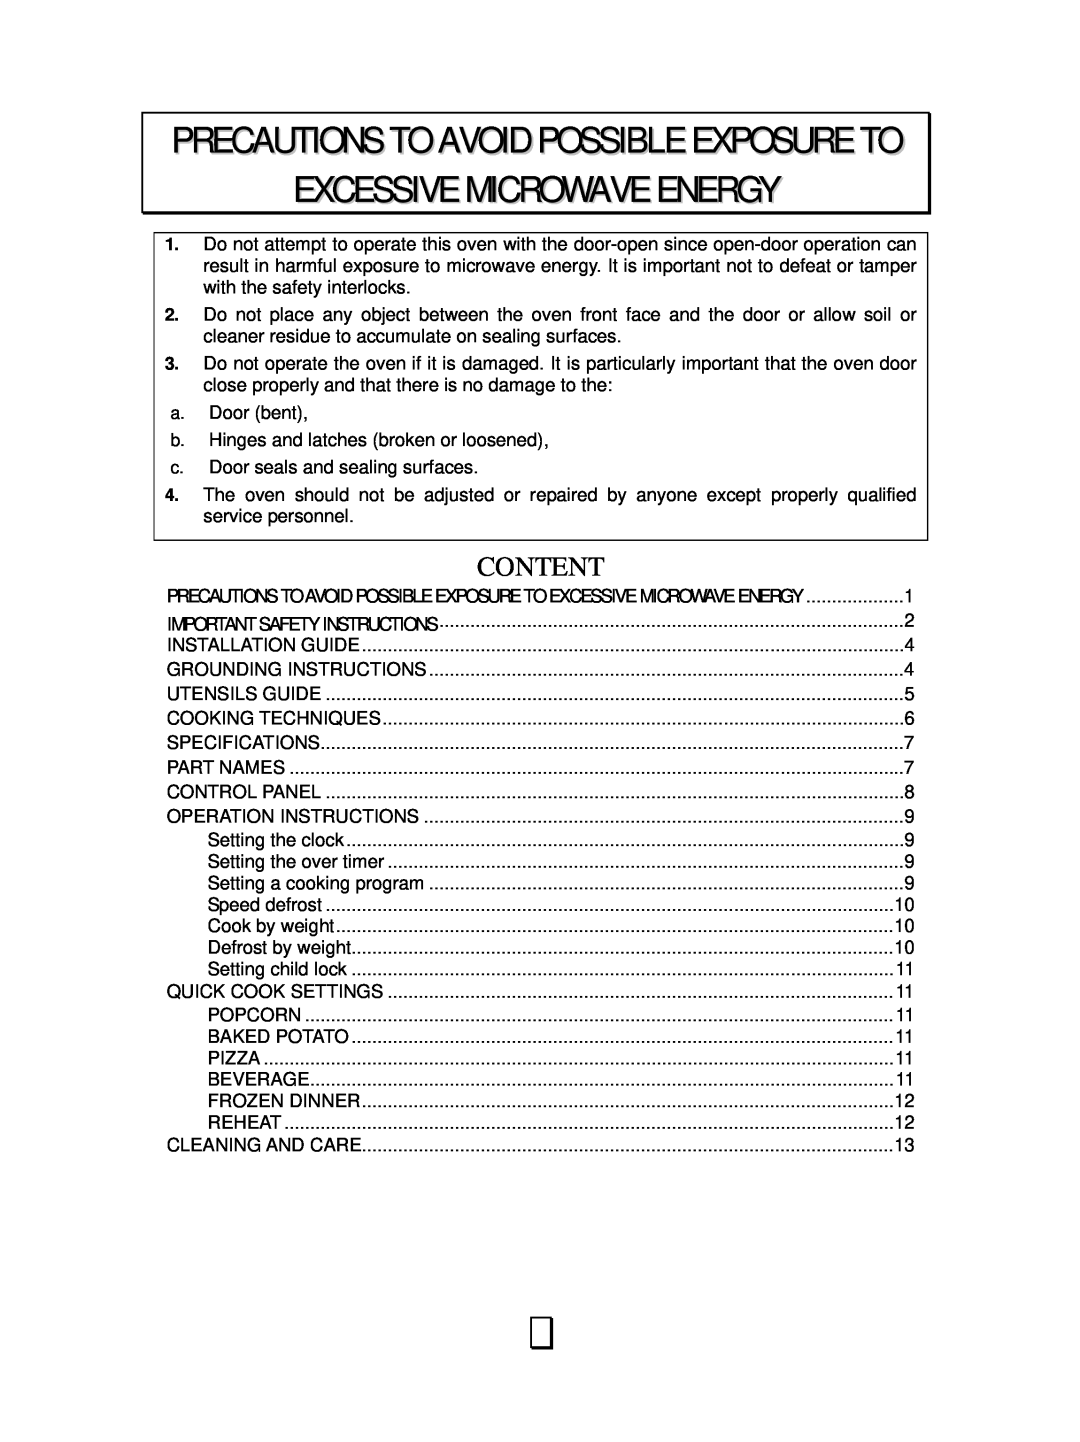 RCA RMW1138 owner manual Precautions To Avoid Possible Exposure To Excessive Microwave Energy, Content 